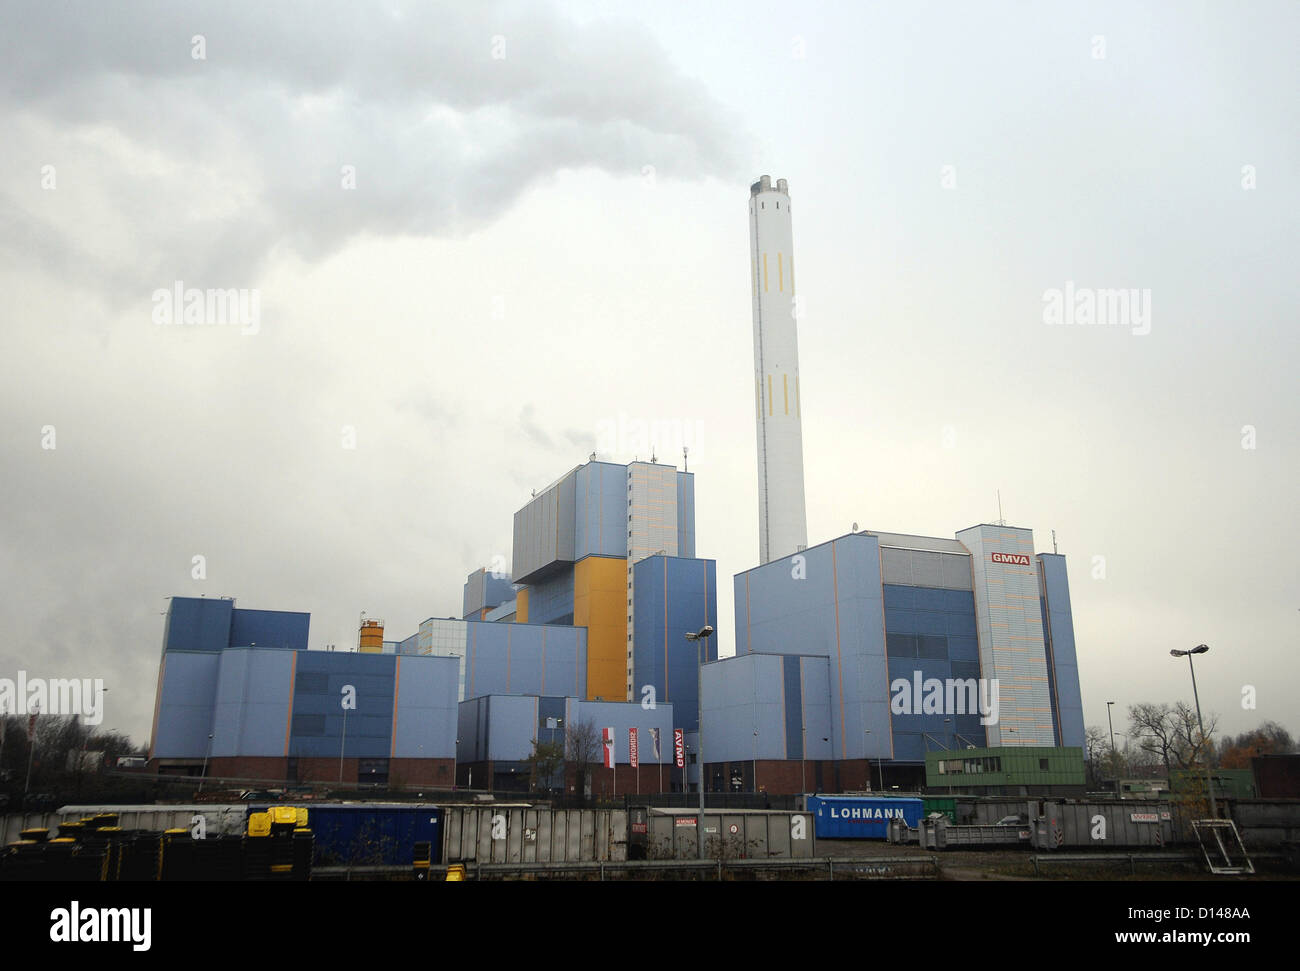 A smoking chimney stands tall above the waste incineration plant in Oberhausen, Germany, 28 November 2012. Photo: Henning Kaiser Stock Photo